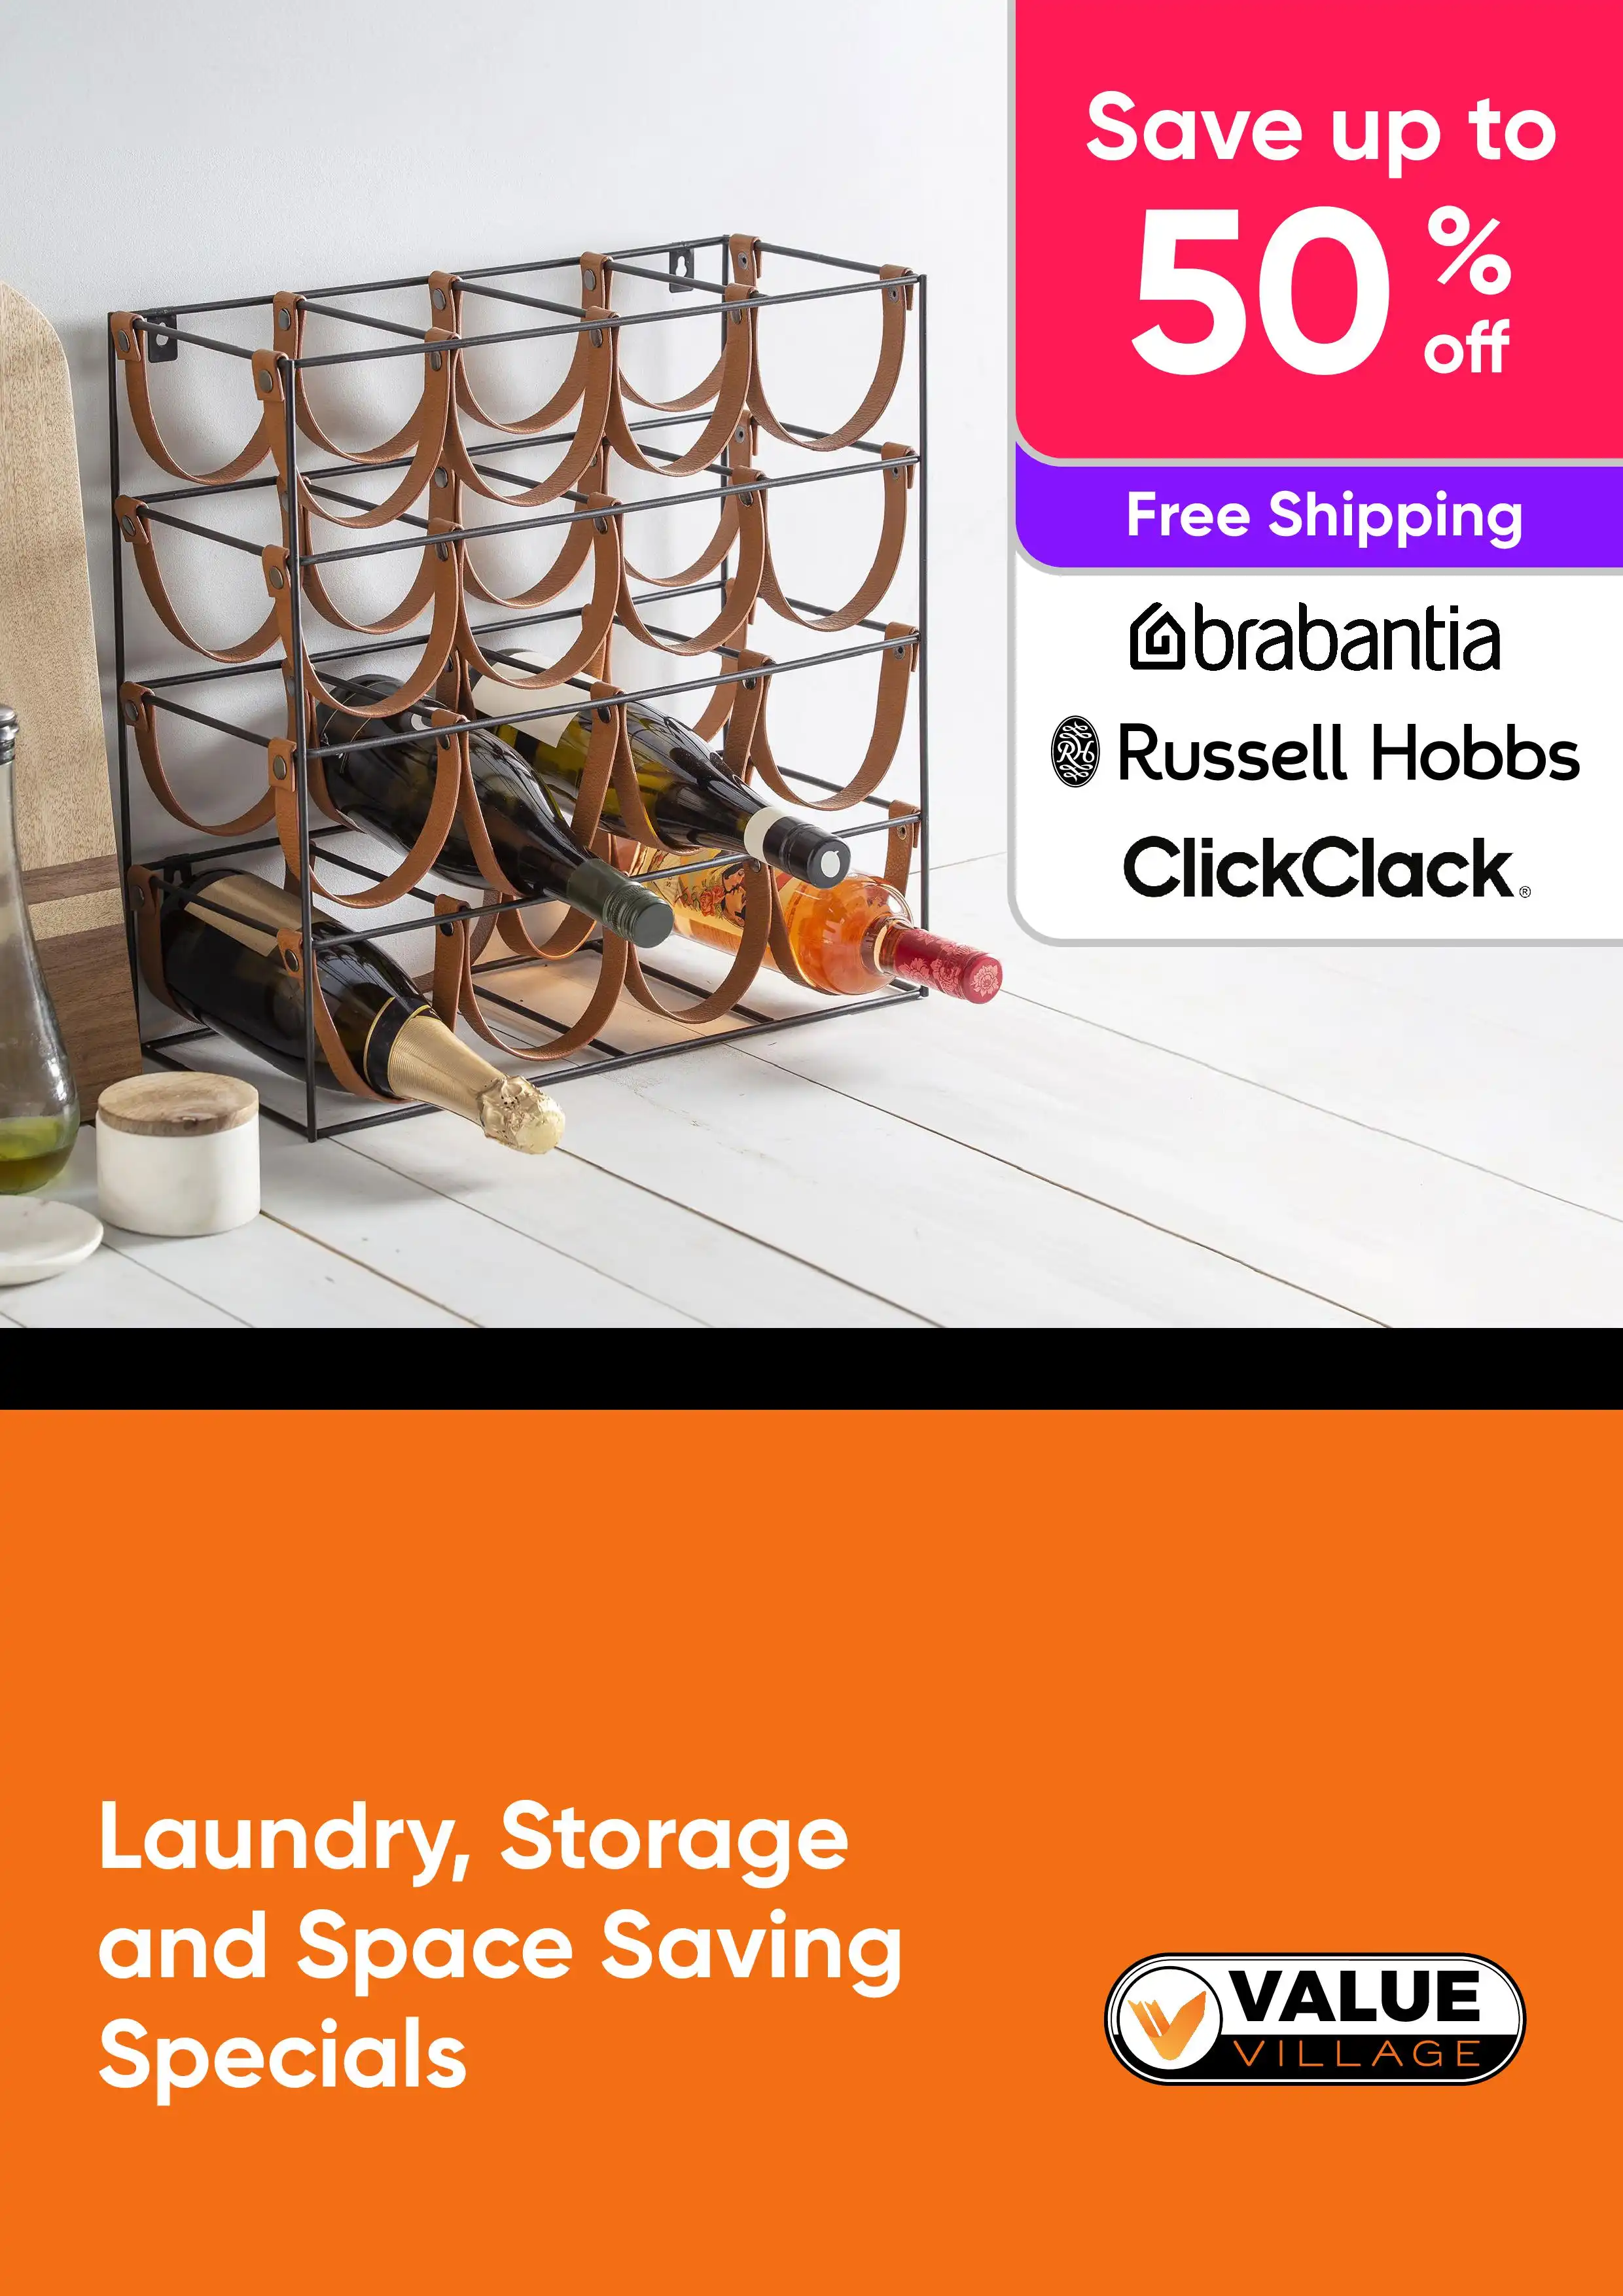 Laundry, Storage and Space Saving Specials - Waste Bins, Ironing, Baskets and More - Brabantia, Russell Hobbs, Click Clack - Up to 50% Off 